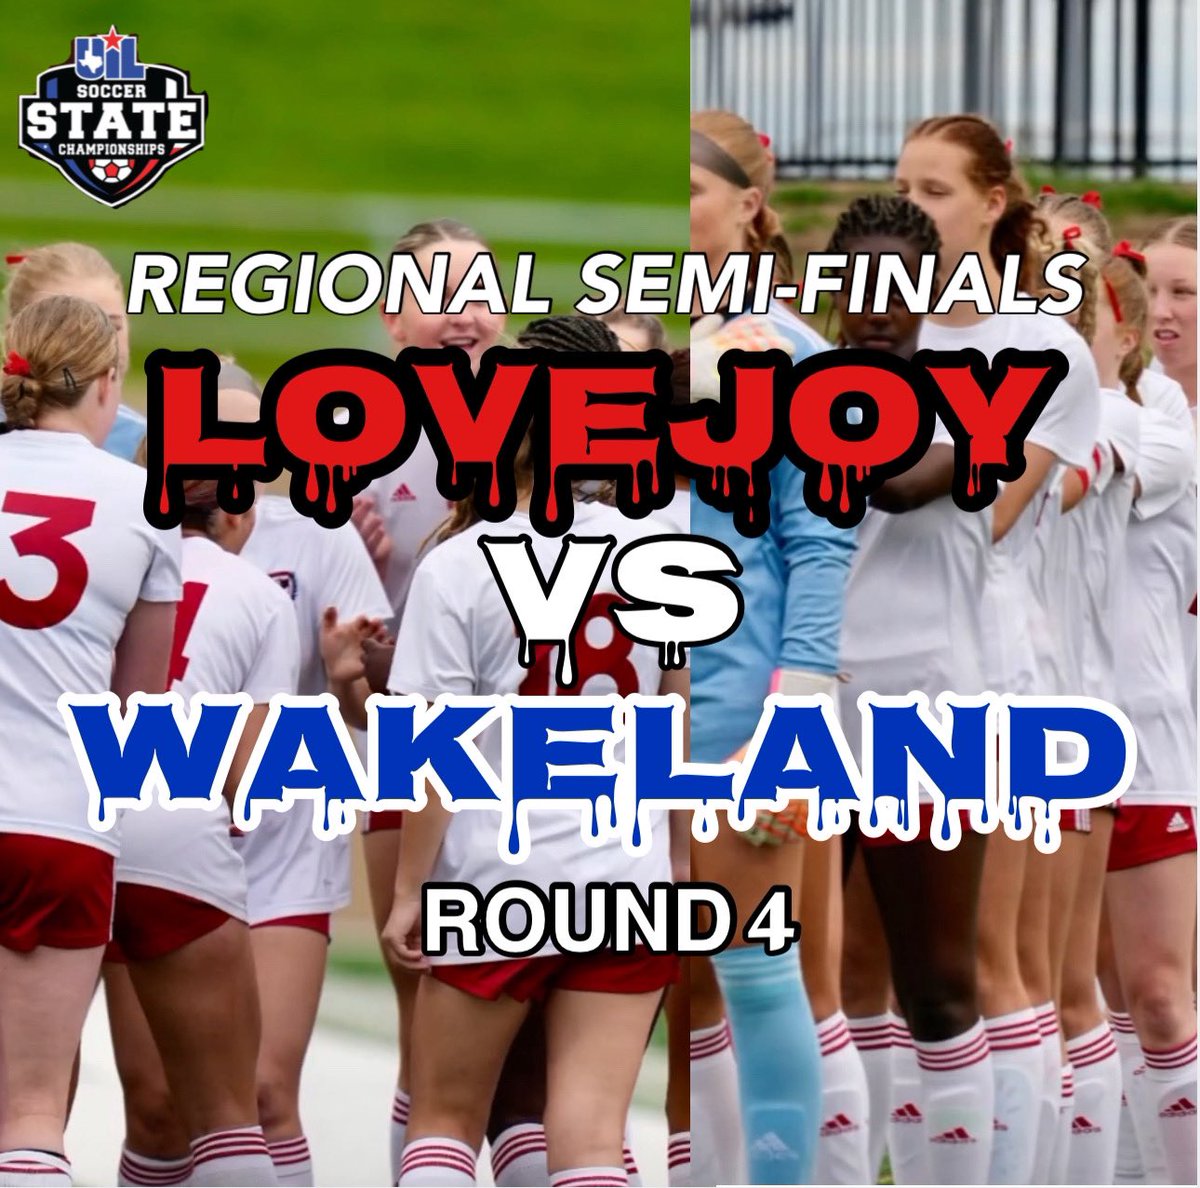 REGIONAL SEMI-FINALS!! R4️⃣
Against The Wakeland Wolverines 
✅Friday, 4/5
⏰1:00PM
📍Standridge Stadium, Carrolton 

LETS GO LEOPARDS!!! #THECHASE

@LOJOgirlsSoccer @uiltexas @LethalSoccer @UILsoccer_ @TheSoccerWire @ImYouthSoccer @iankeeble